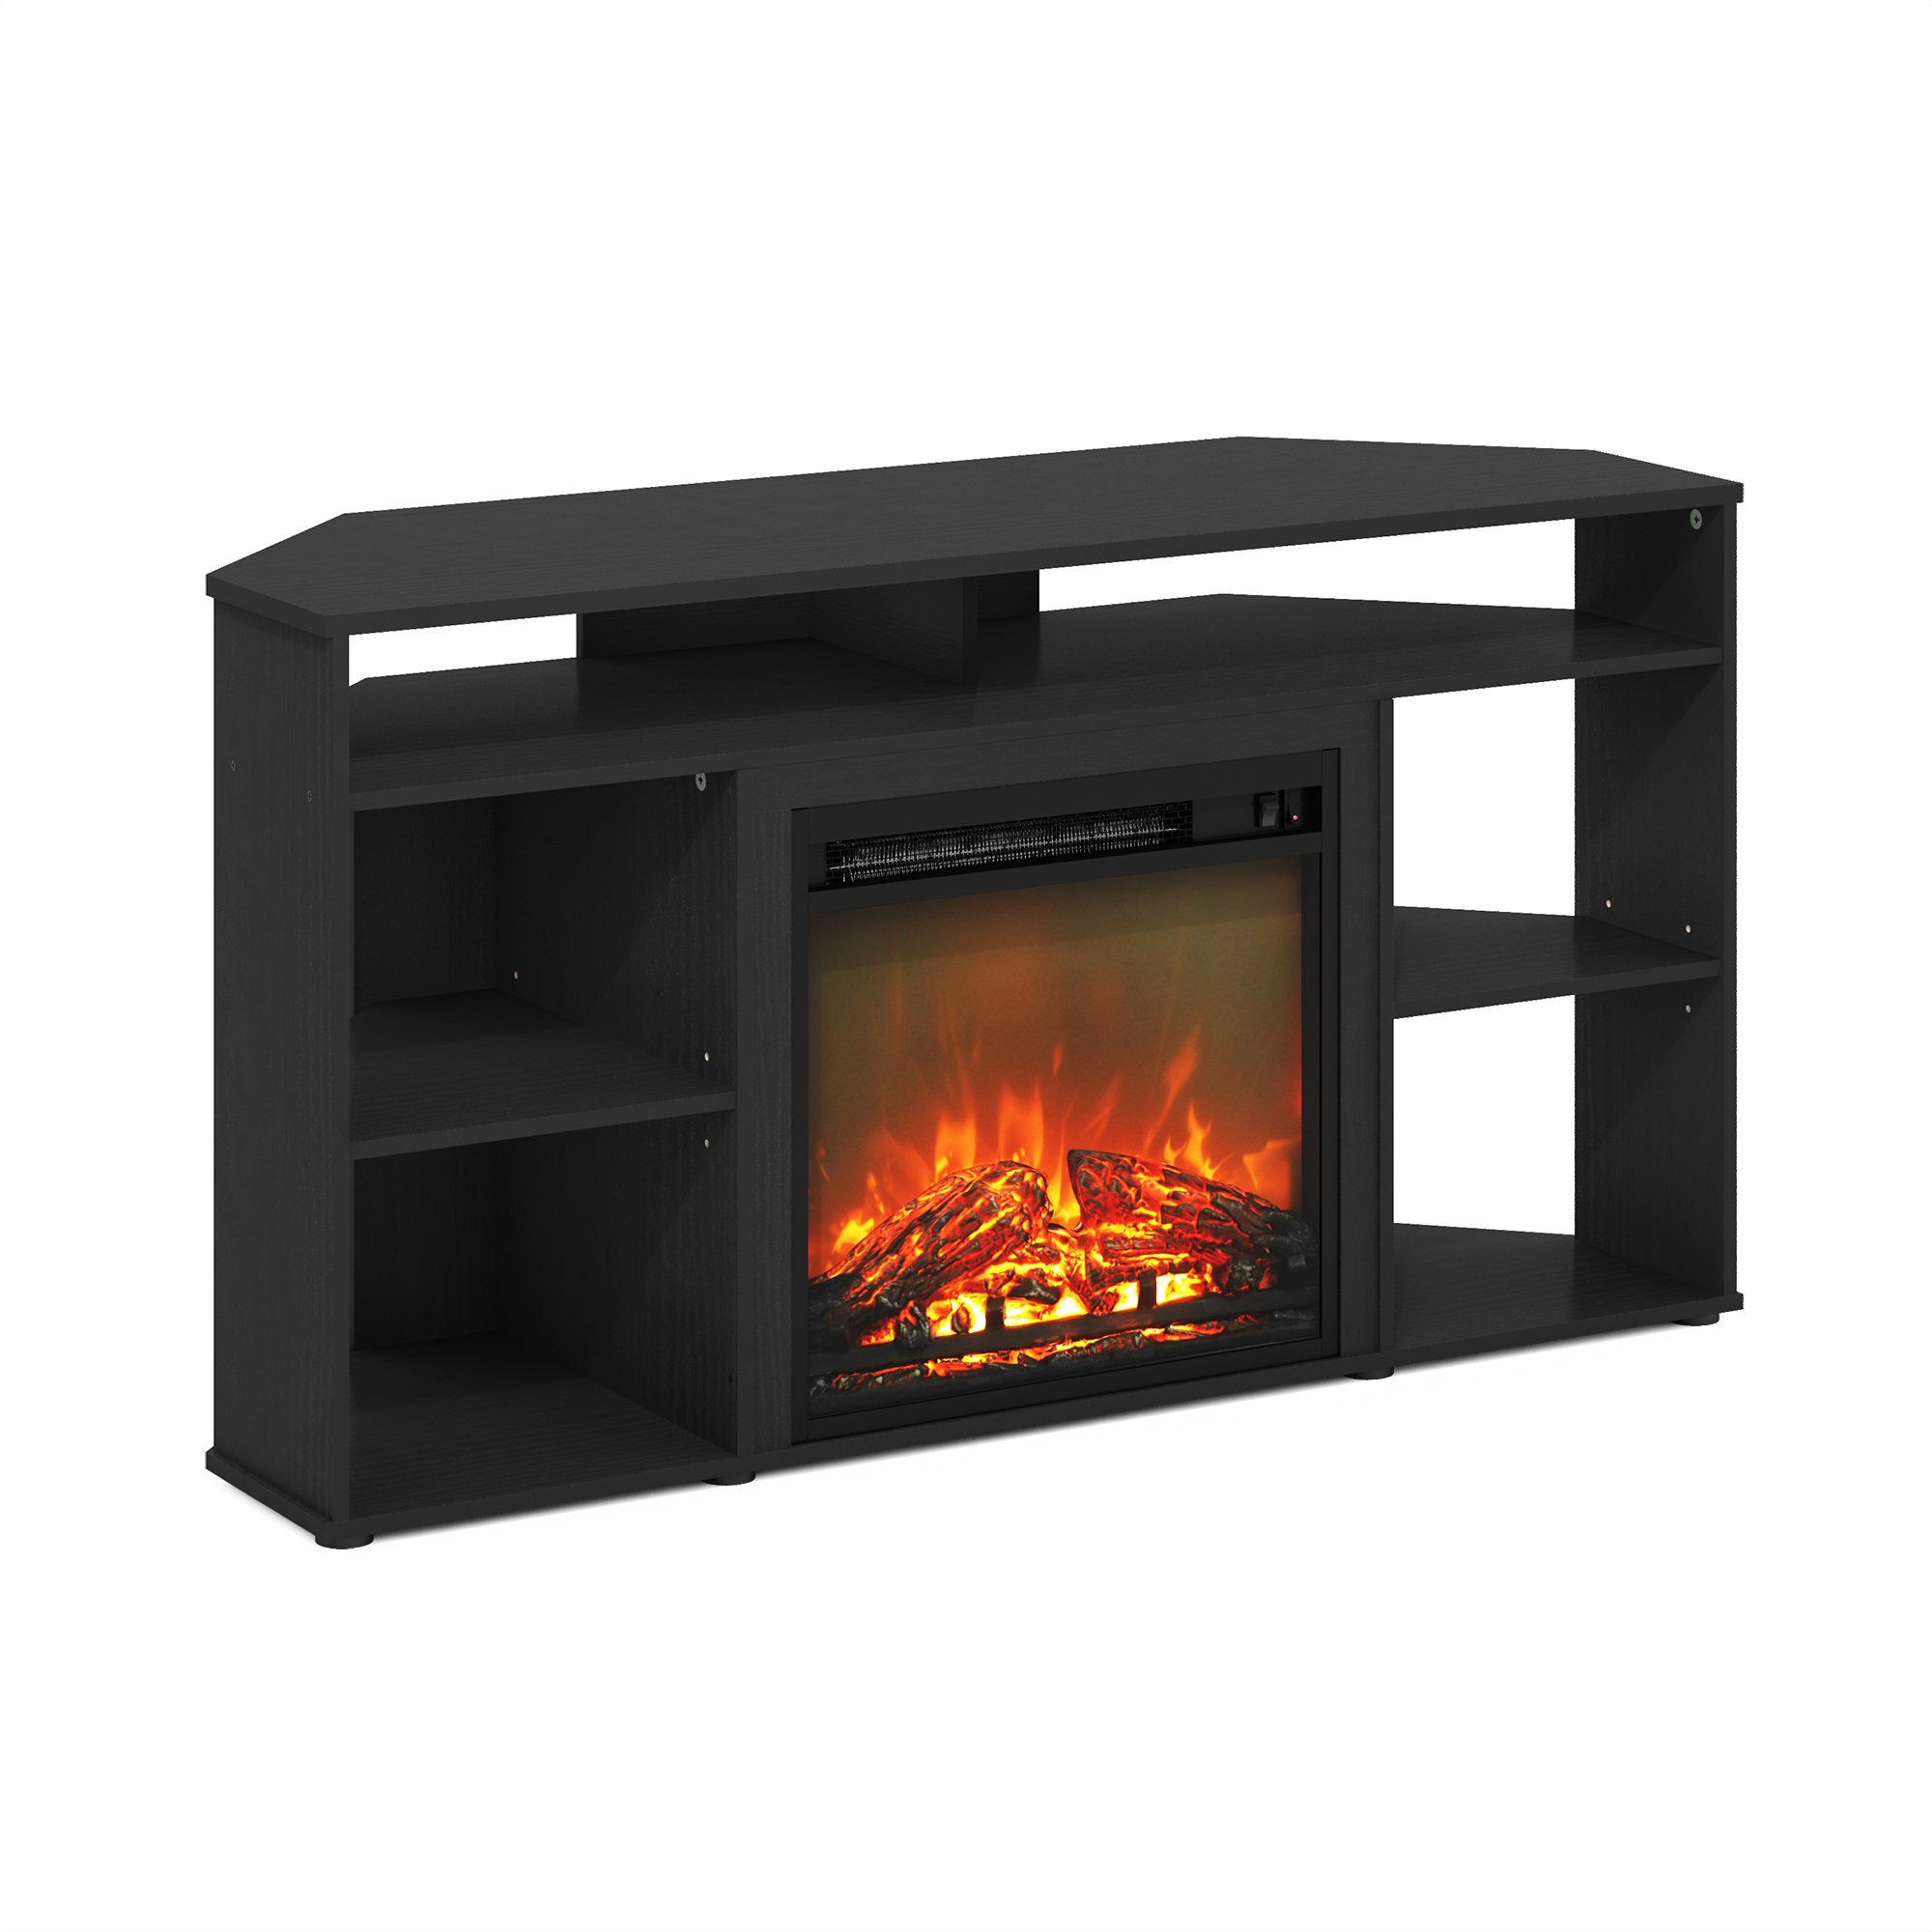 Lilola Home Furinno Jensen Corner TV Stand with Fireplace for TV up to 55 Inches, Americano